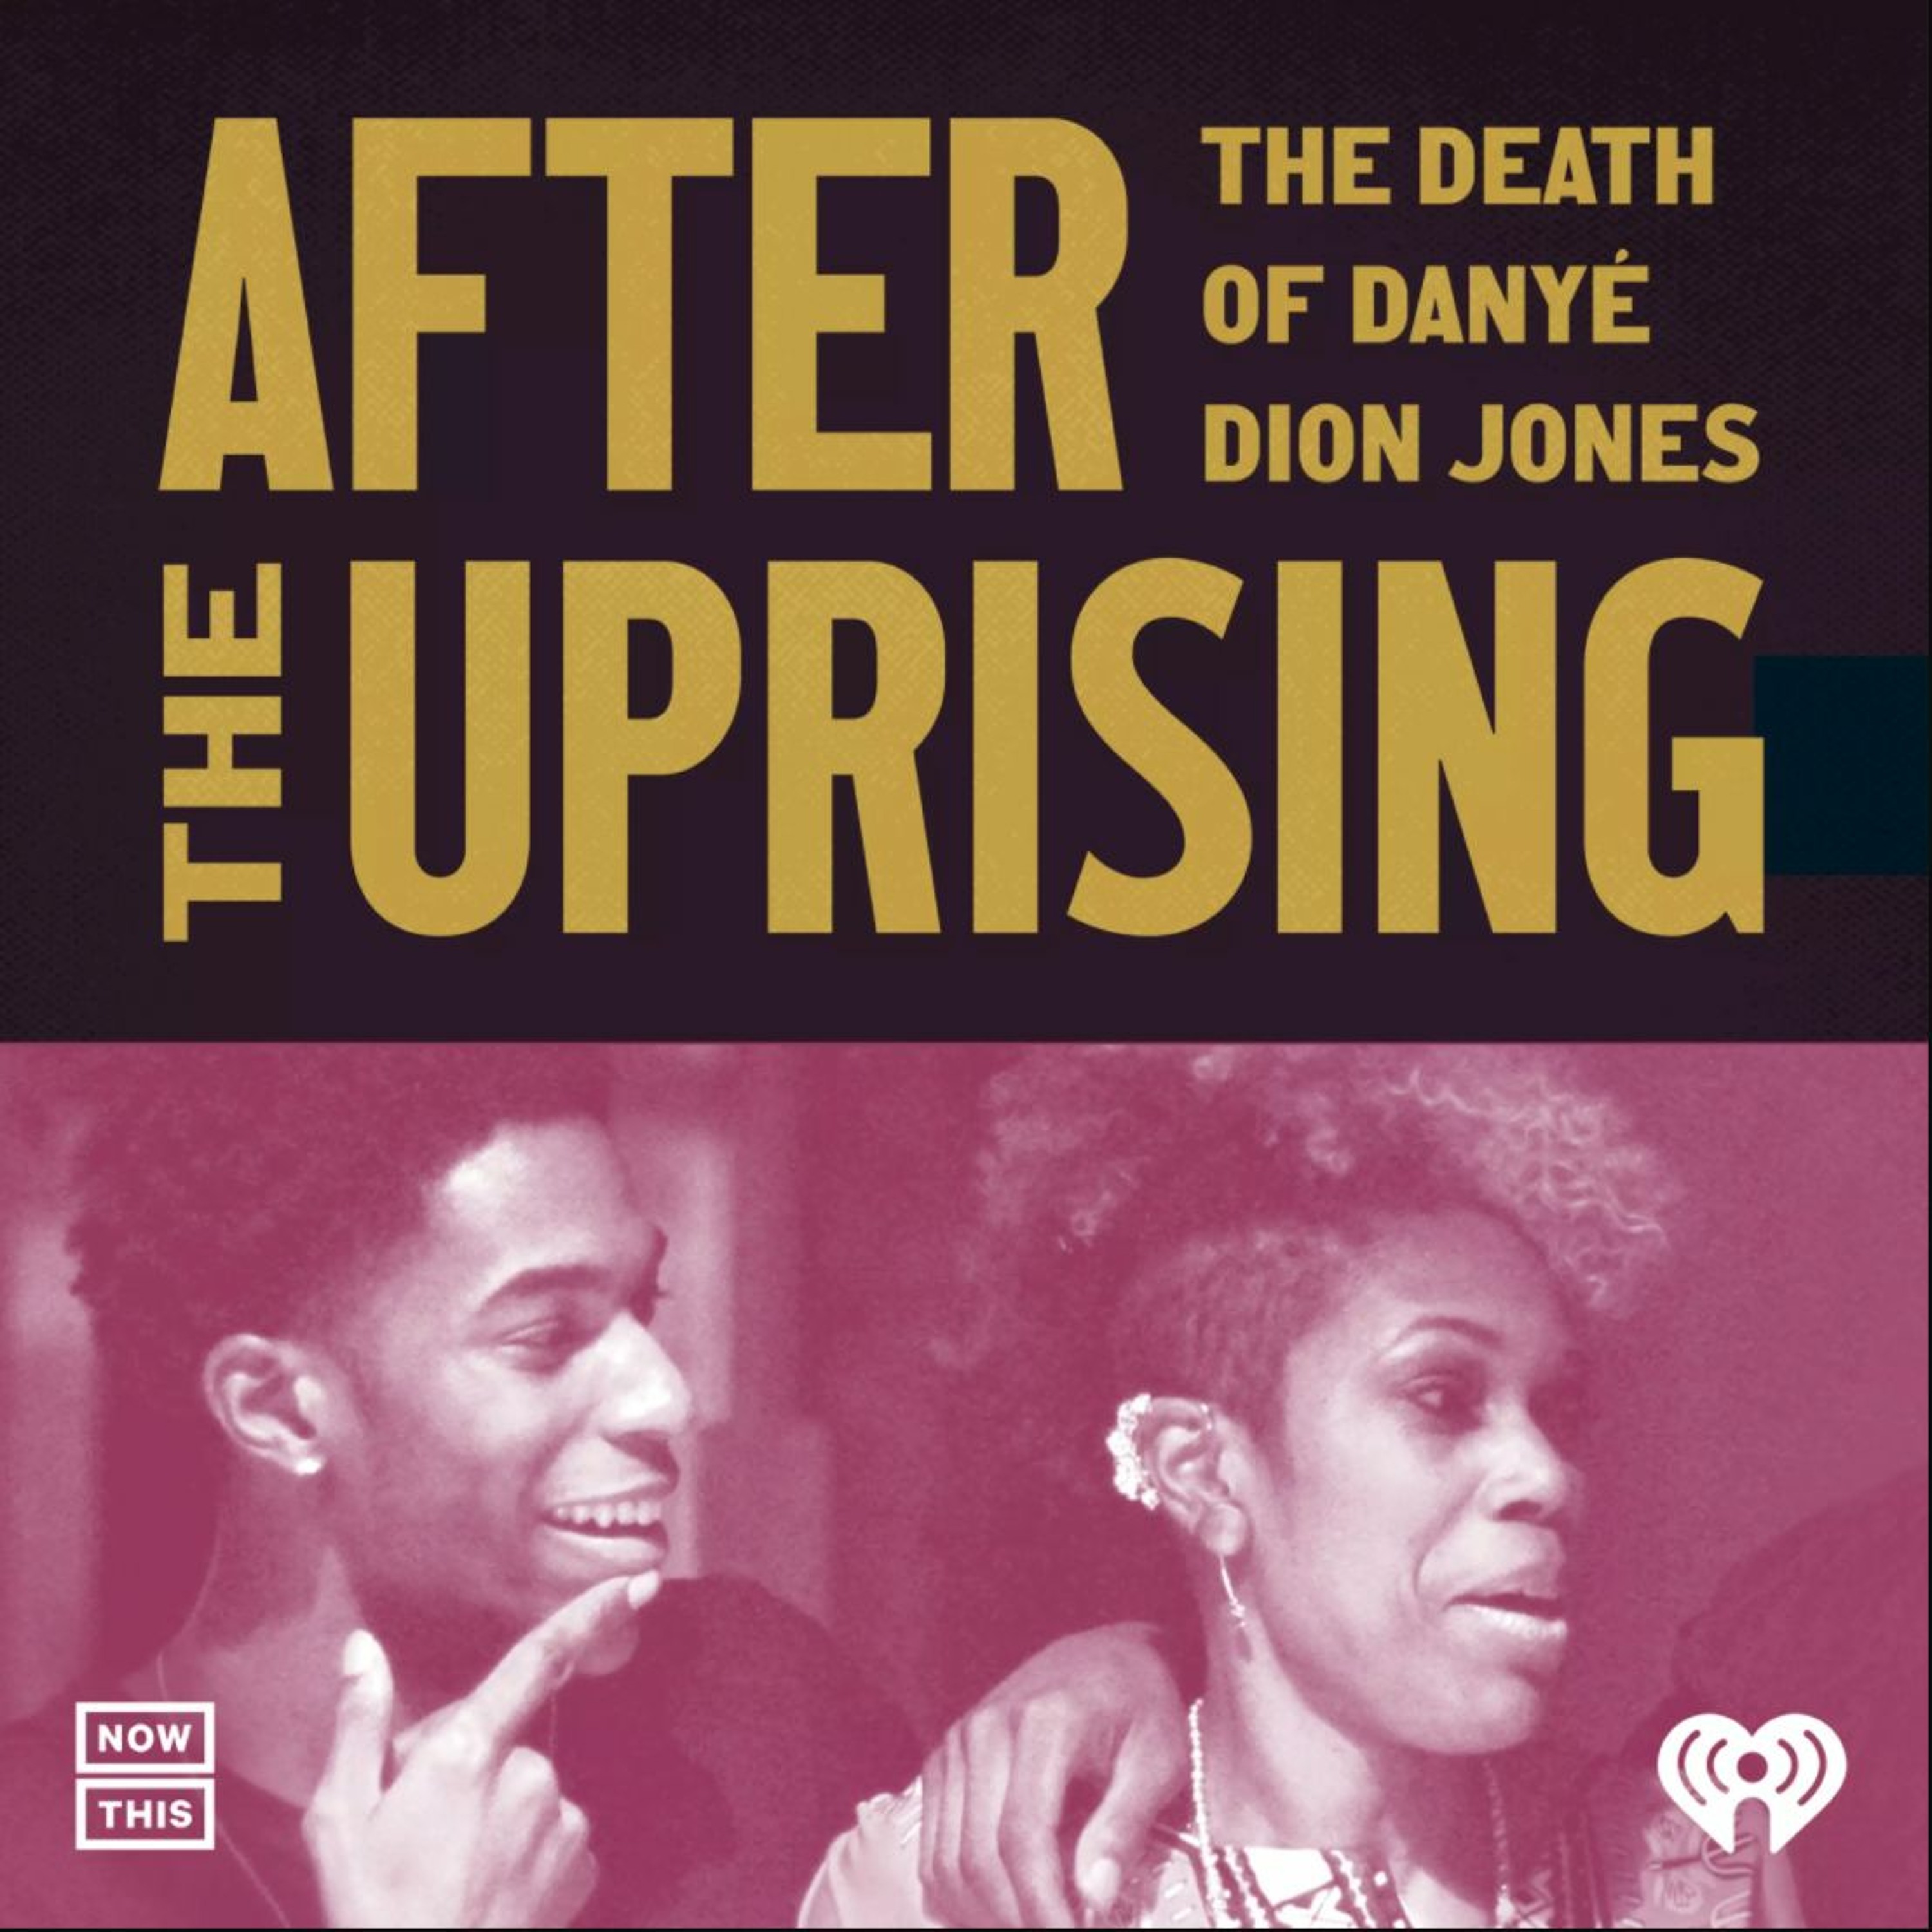 After the Uprising: The Death of Danyé Dion Jones  w/ John Duffy & Ray Nowosielski